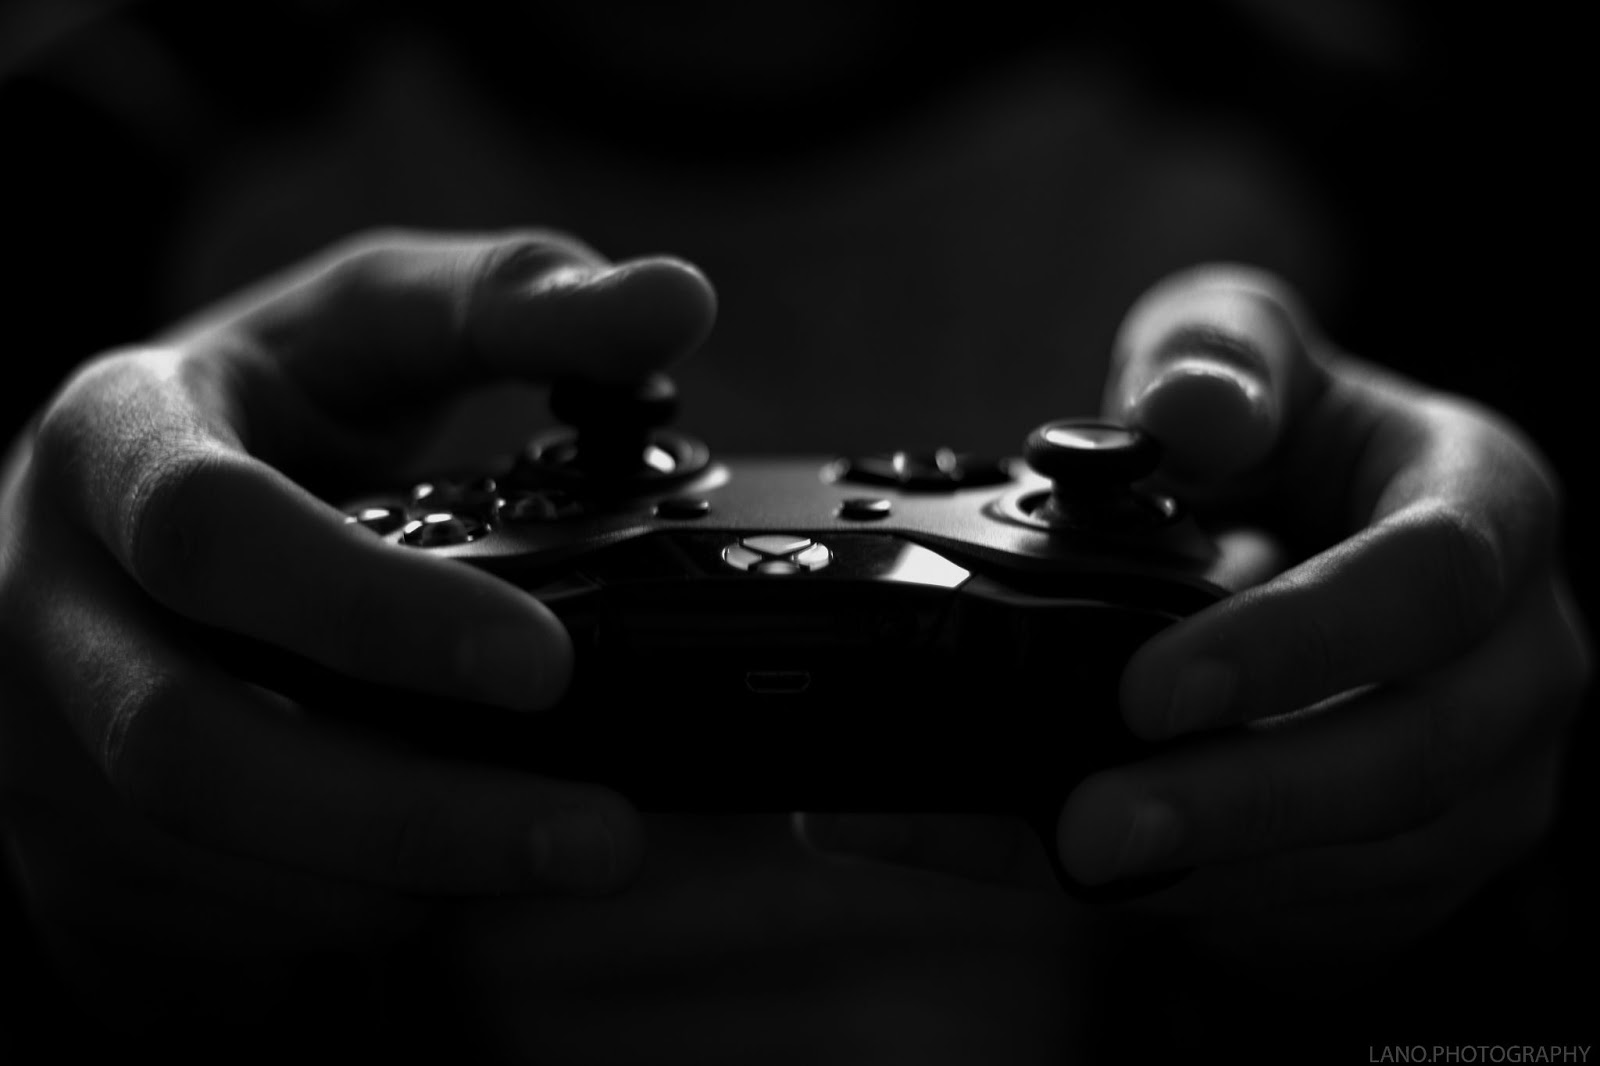 hands using a game controller